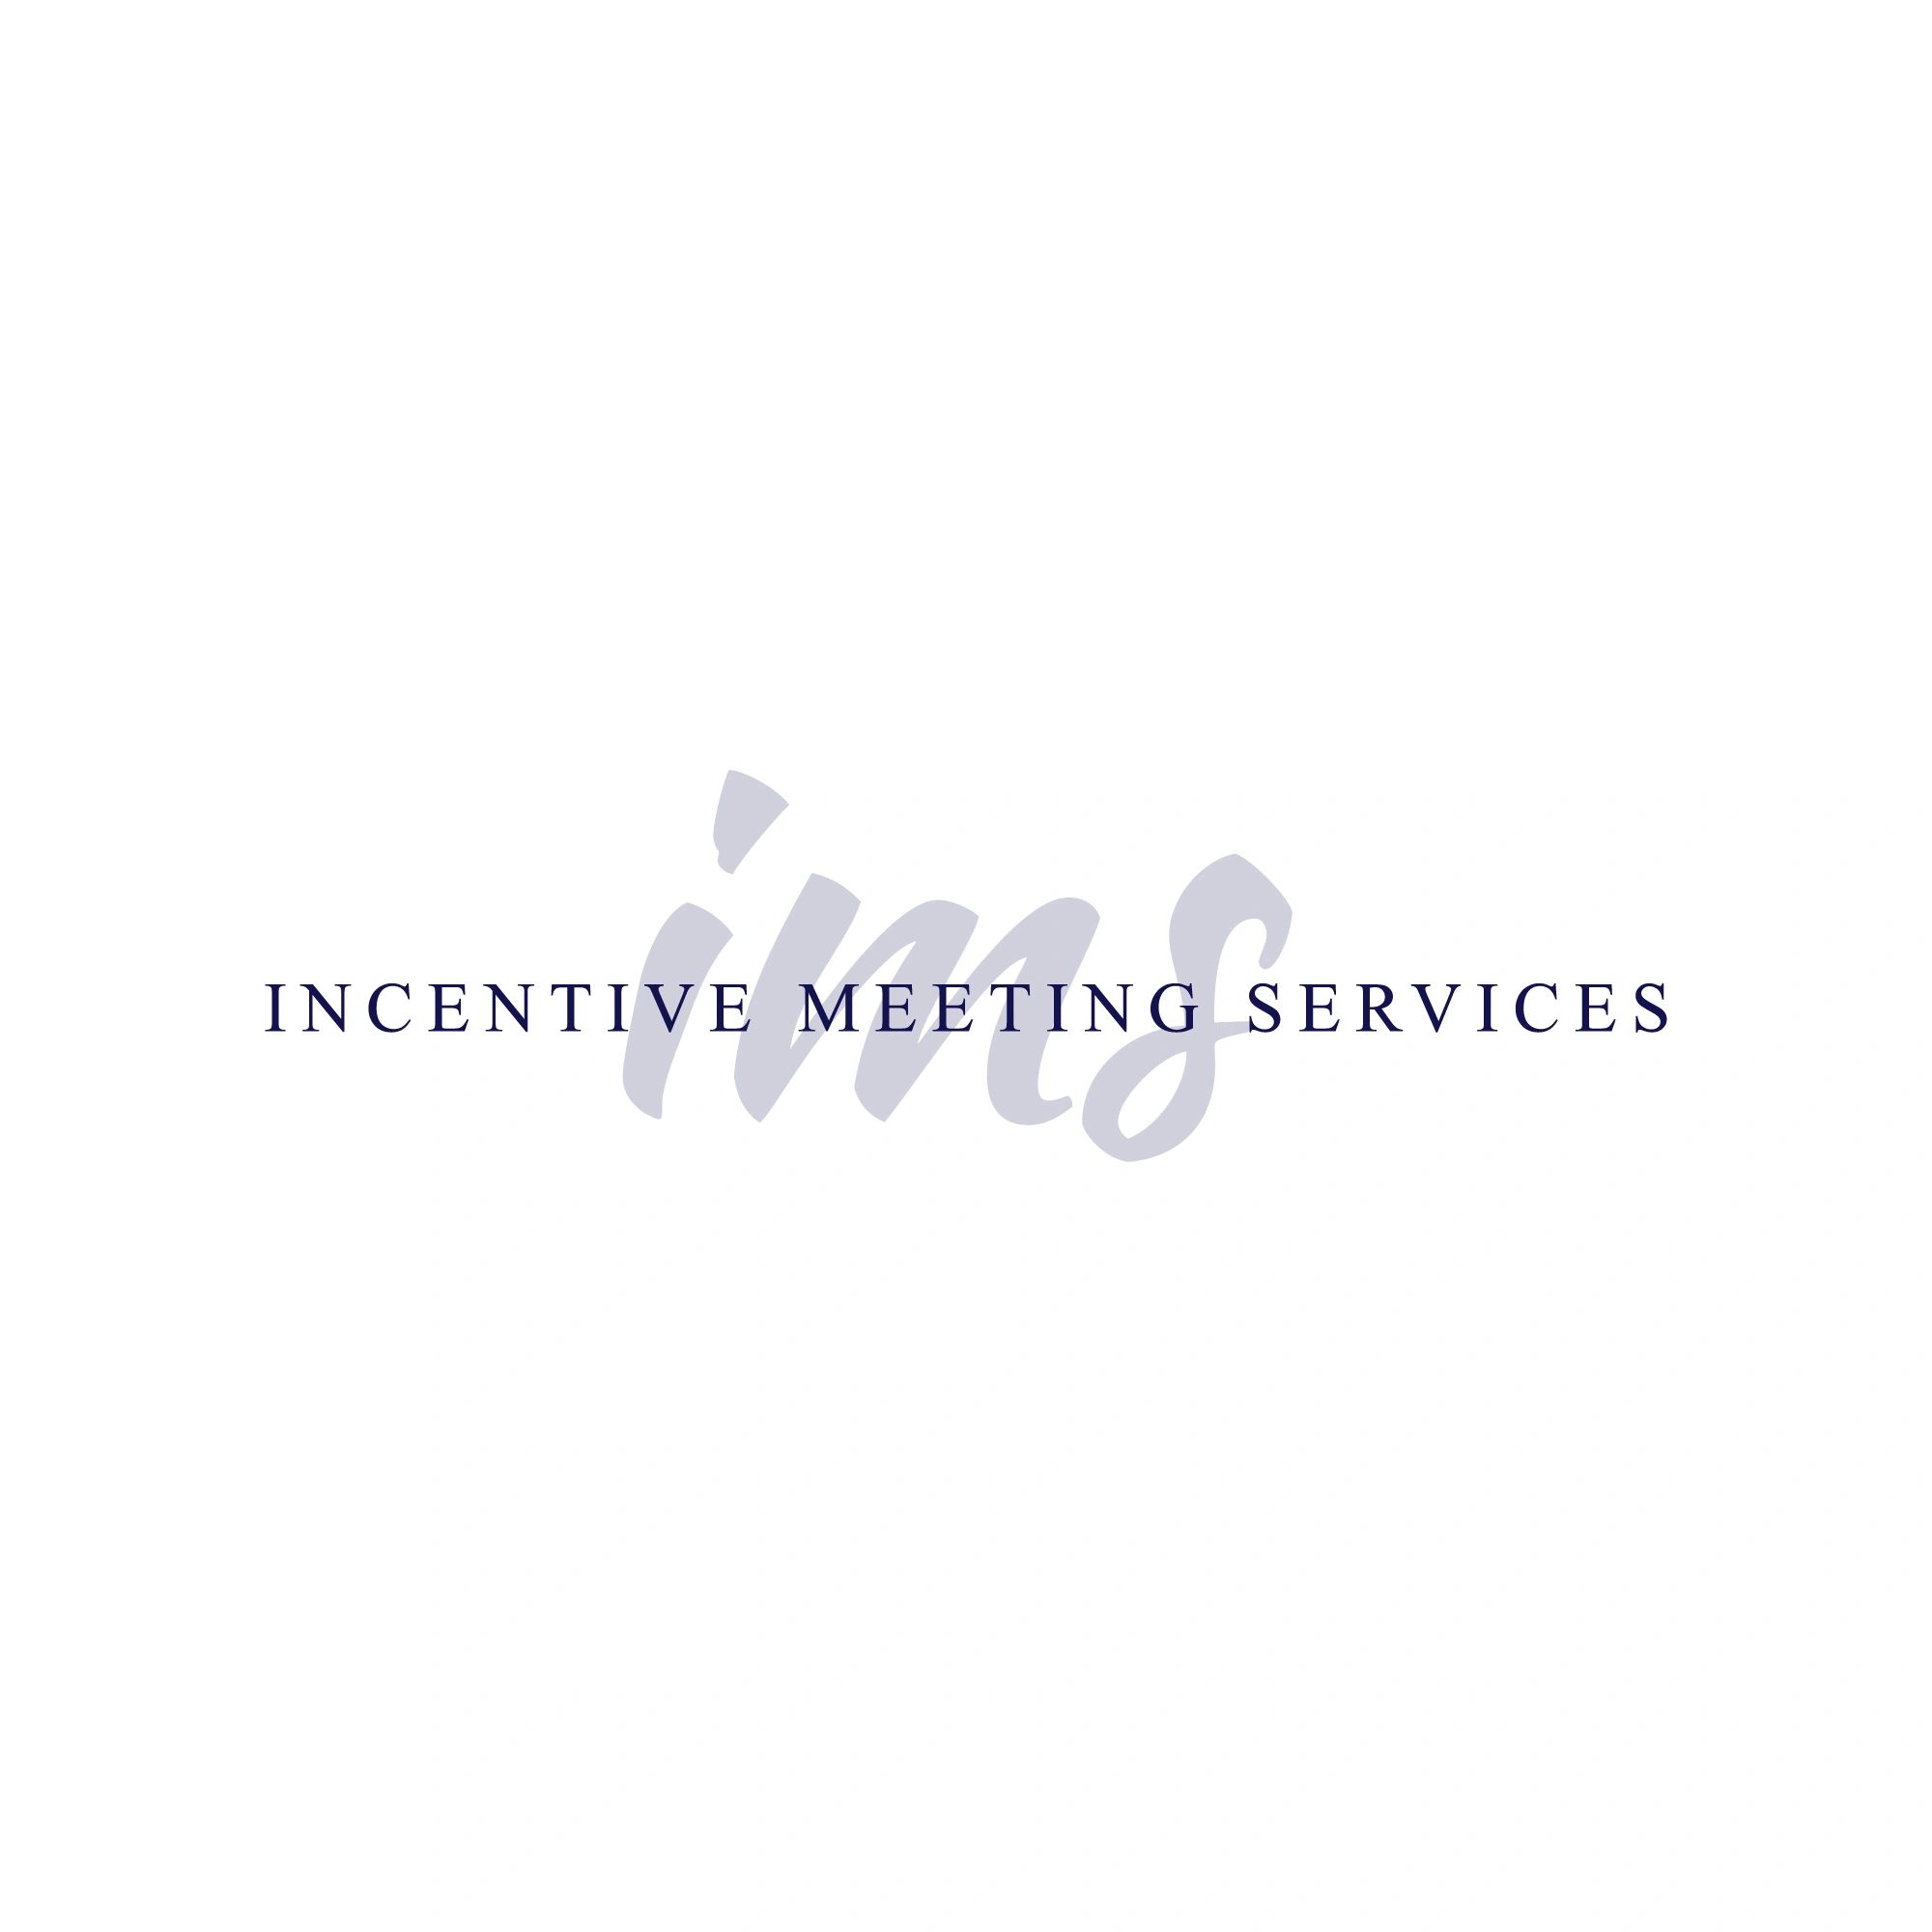 IMS, Incentive Meeting Services